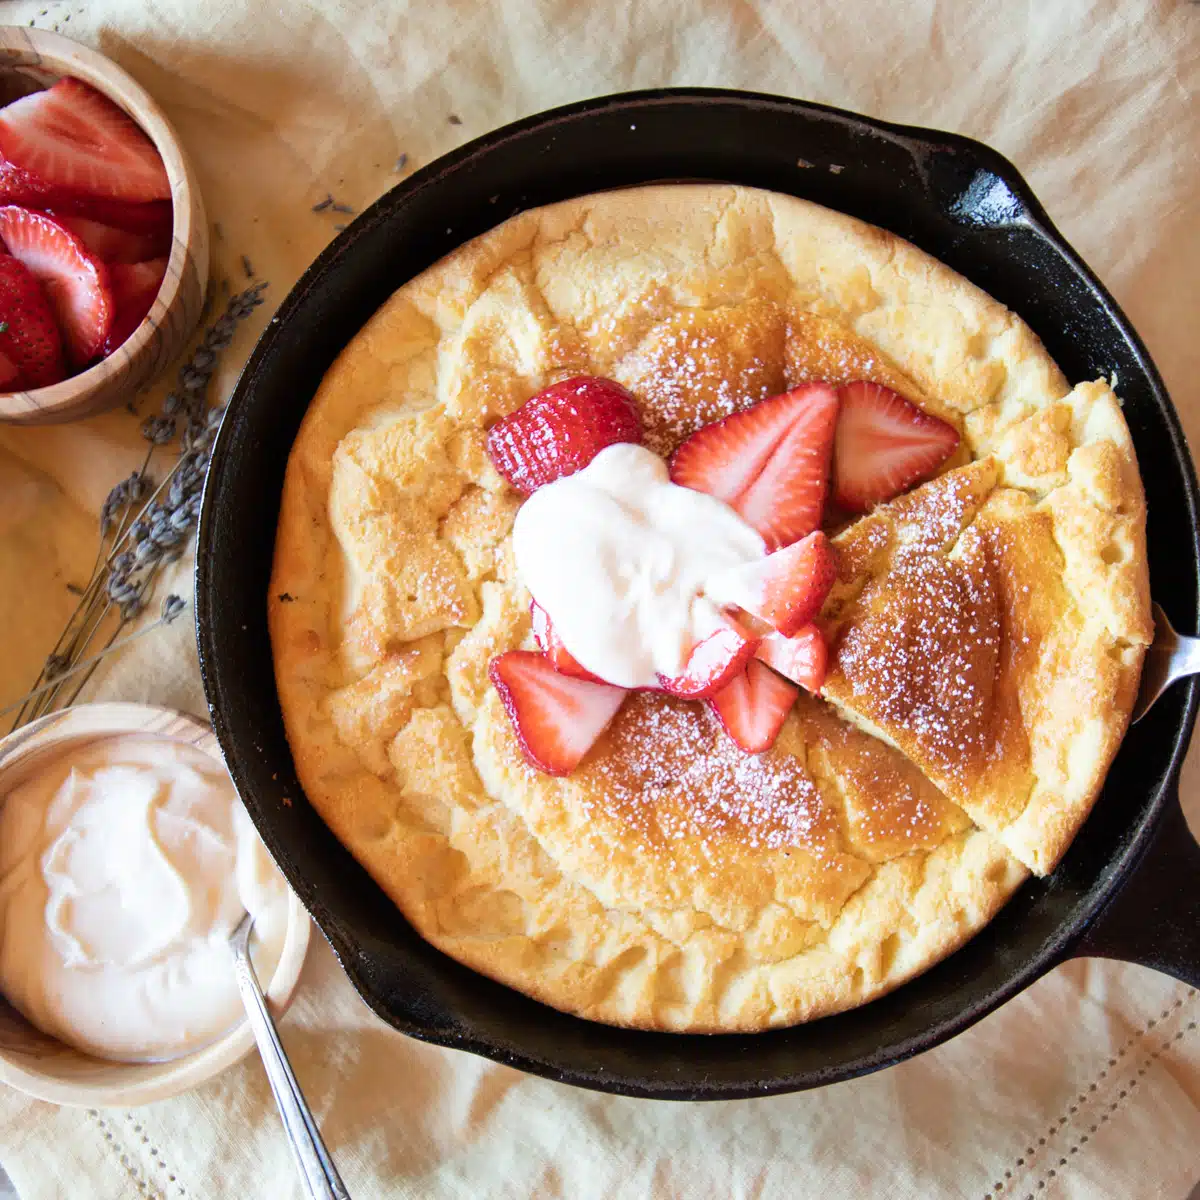 Soufflé style German pancake, cut, and topped with strawberries and whipped ricotta cheese.